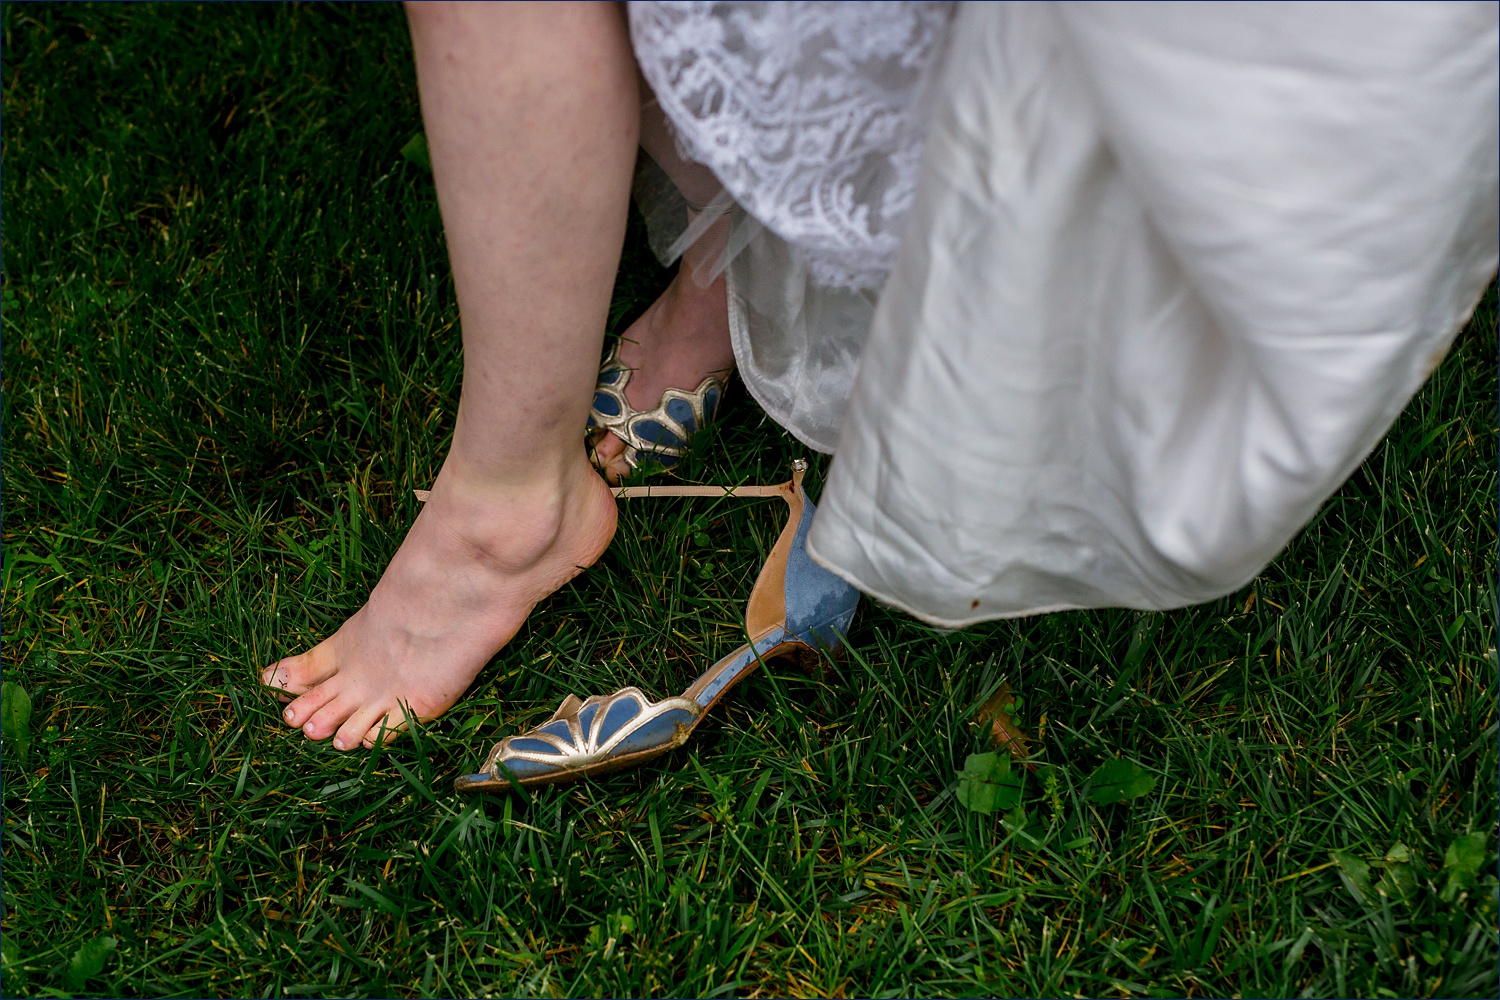 A wet wedding day means wiping those toes in the grass on the wedding day